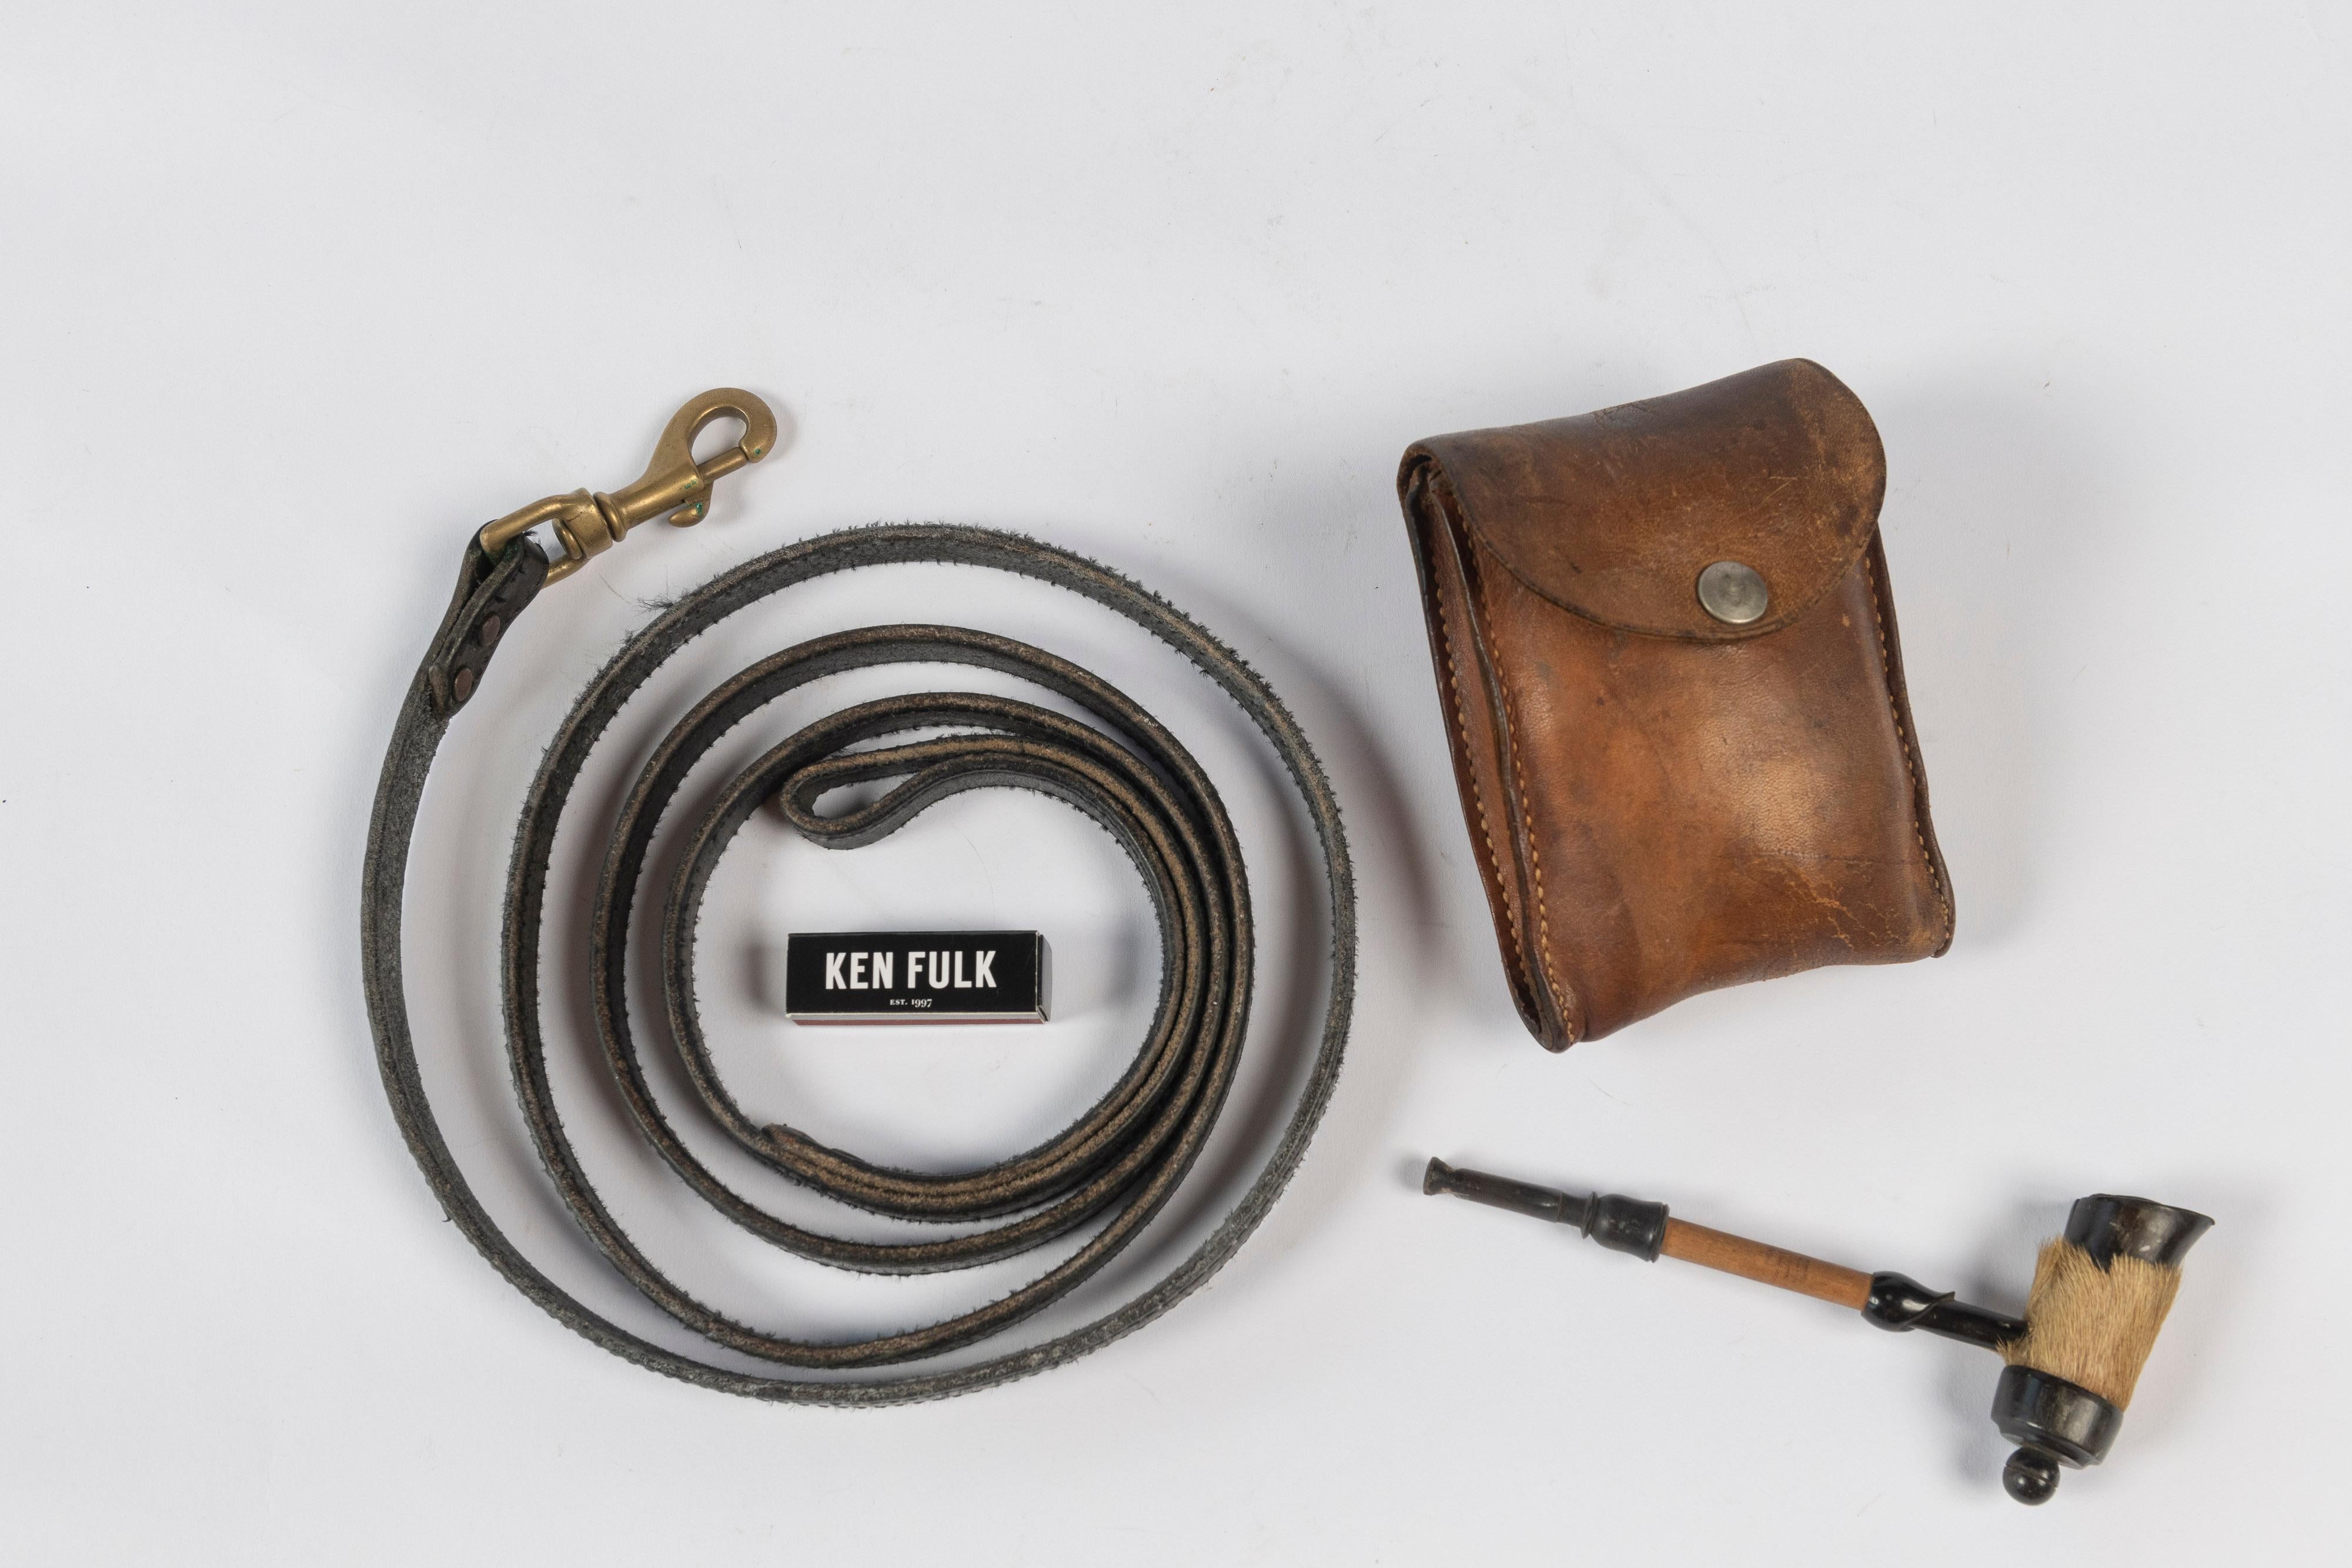 Collection of interesting vintage items sold together including:

Leather Pouch, embossed 